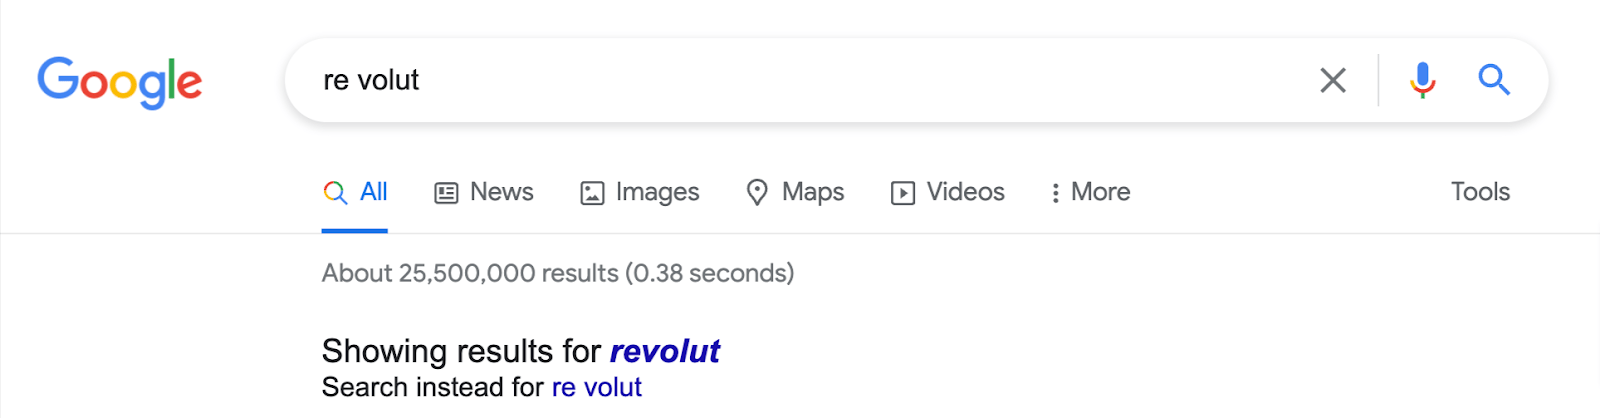 Misspelling of "revolut" as "re volut"; Google autocorrects term and indicates it'll show results for the name with the correct spelling